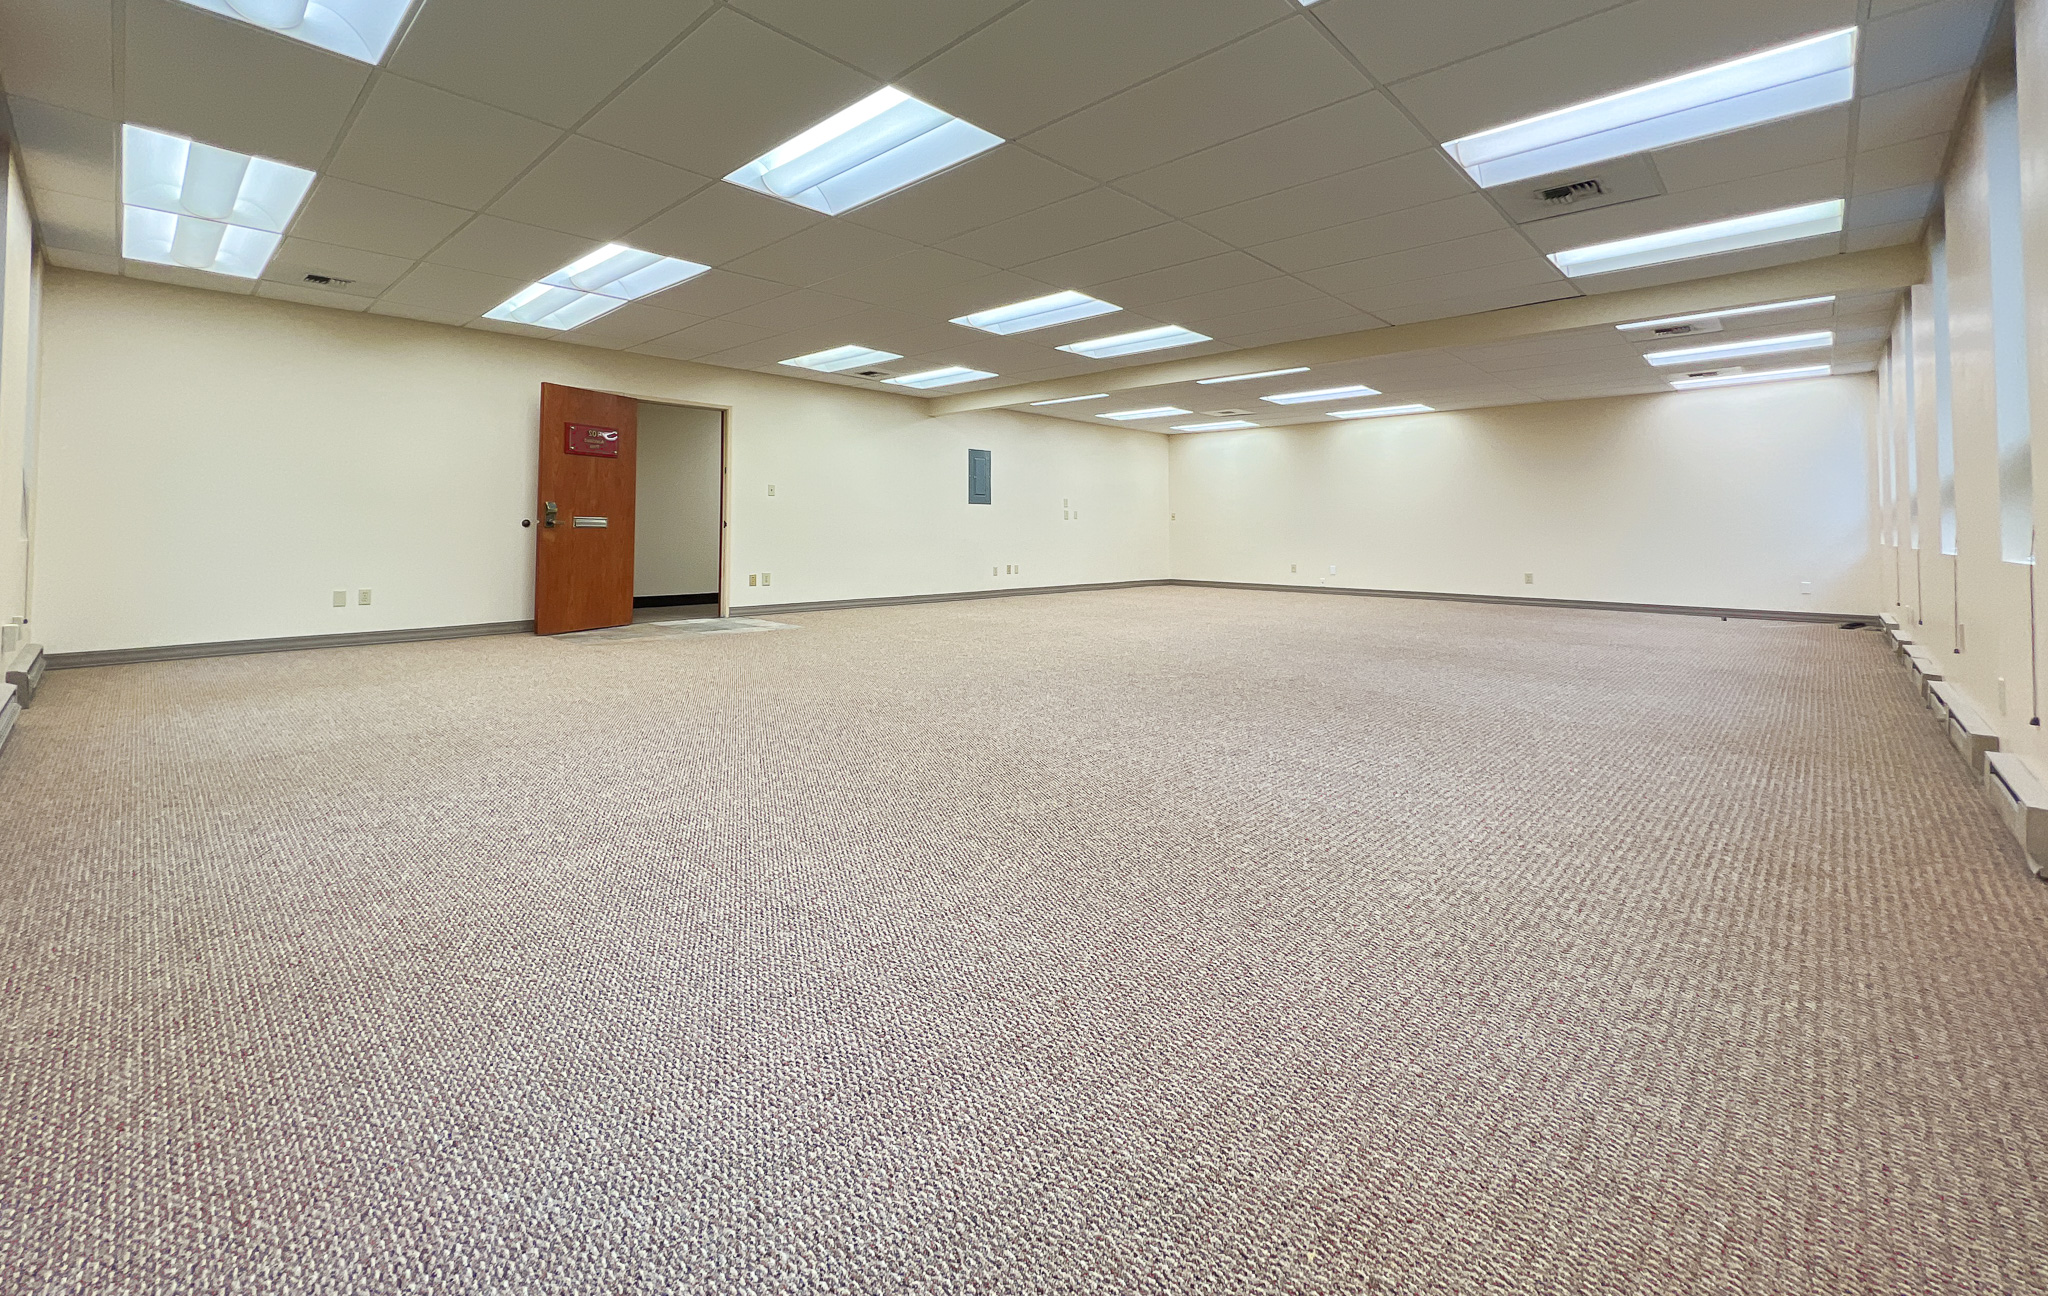 Interior of RSD Properties' Suite 102 in the 750 W 2nd Avenue office commercial office building in Anchorage, Alaska. Several windows on the right, tan carpeting and a drop ceiling, brown exit door on the left.